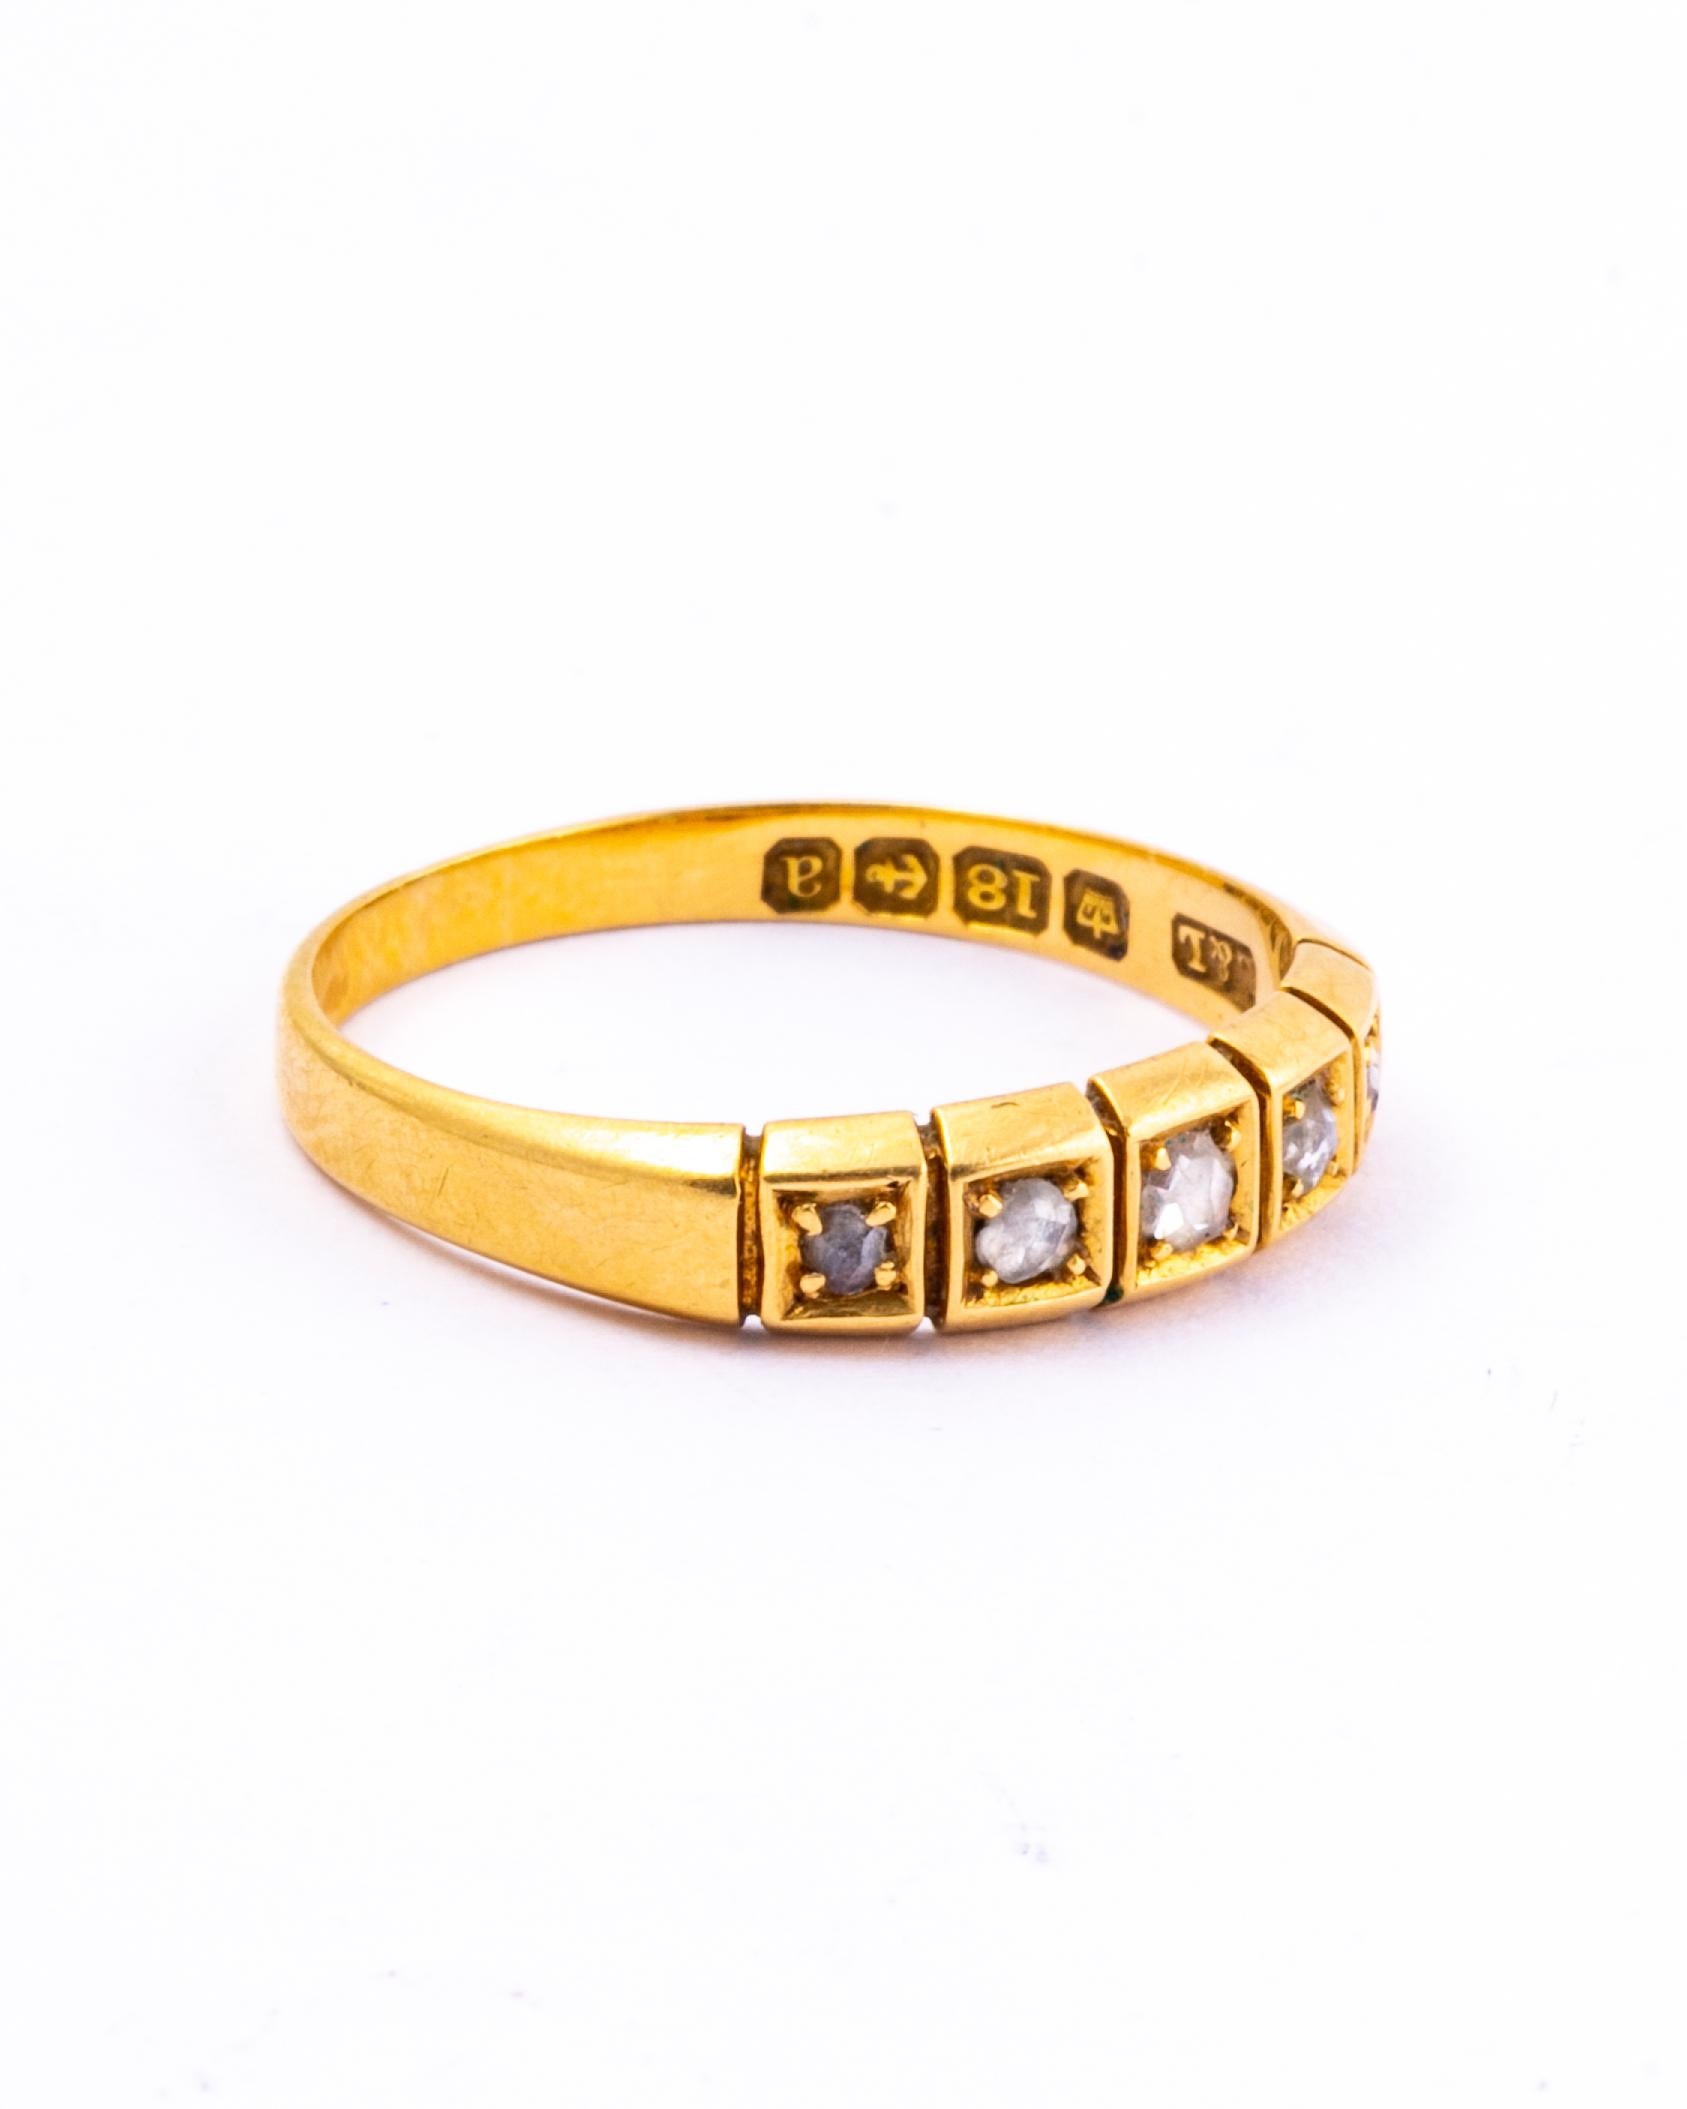 The rose cut diamonds in this band are bright and have a great sparkle. The ring is modelled in 18ct gold and the stones are set in square settings. 

Ring Size: O or 7 1/4 
Band Width: 4mm

Weight: 2.69g